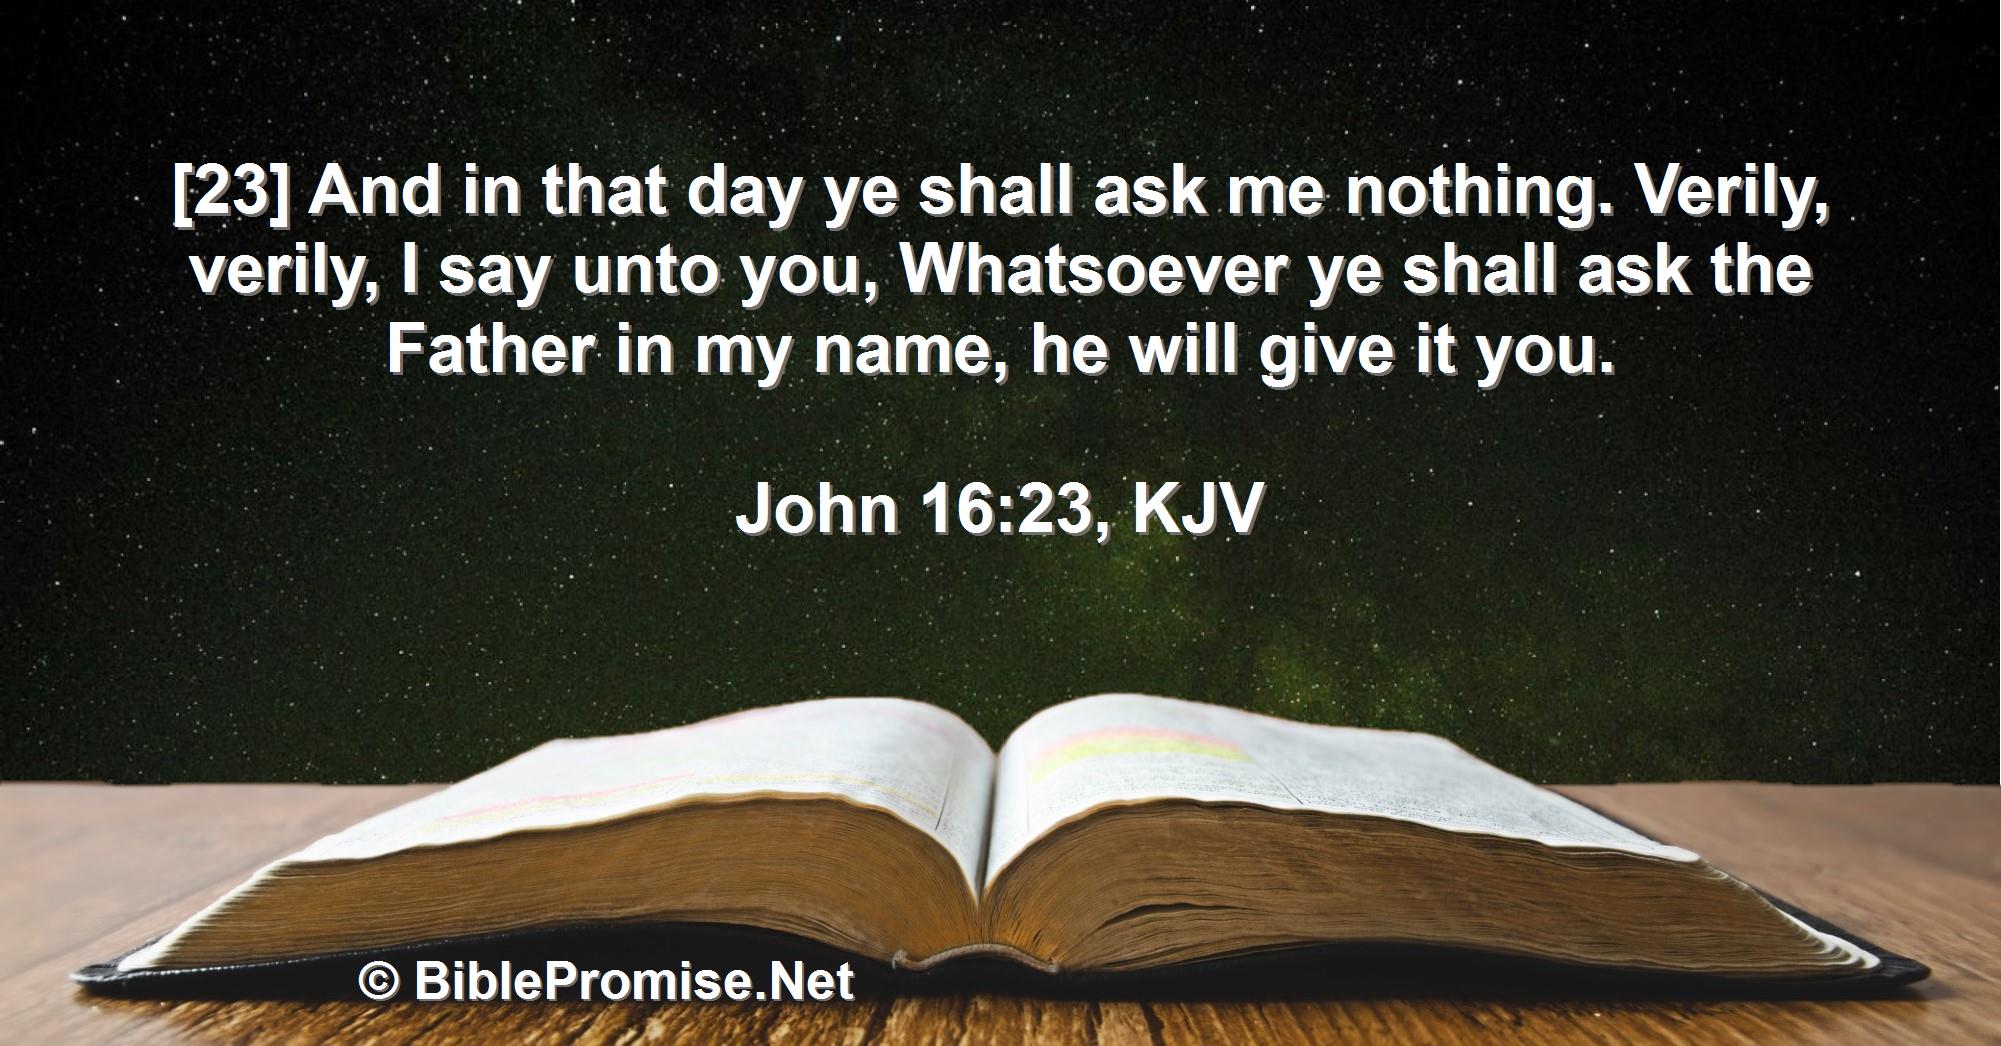 Wednesday, May 24, 2023 - John 16:23 (KJV) - Bible promise that God will answer your prayers.